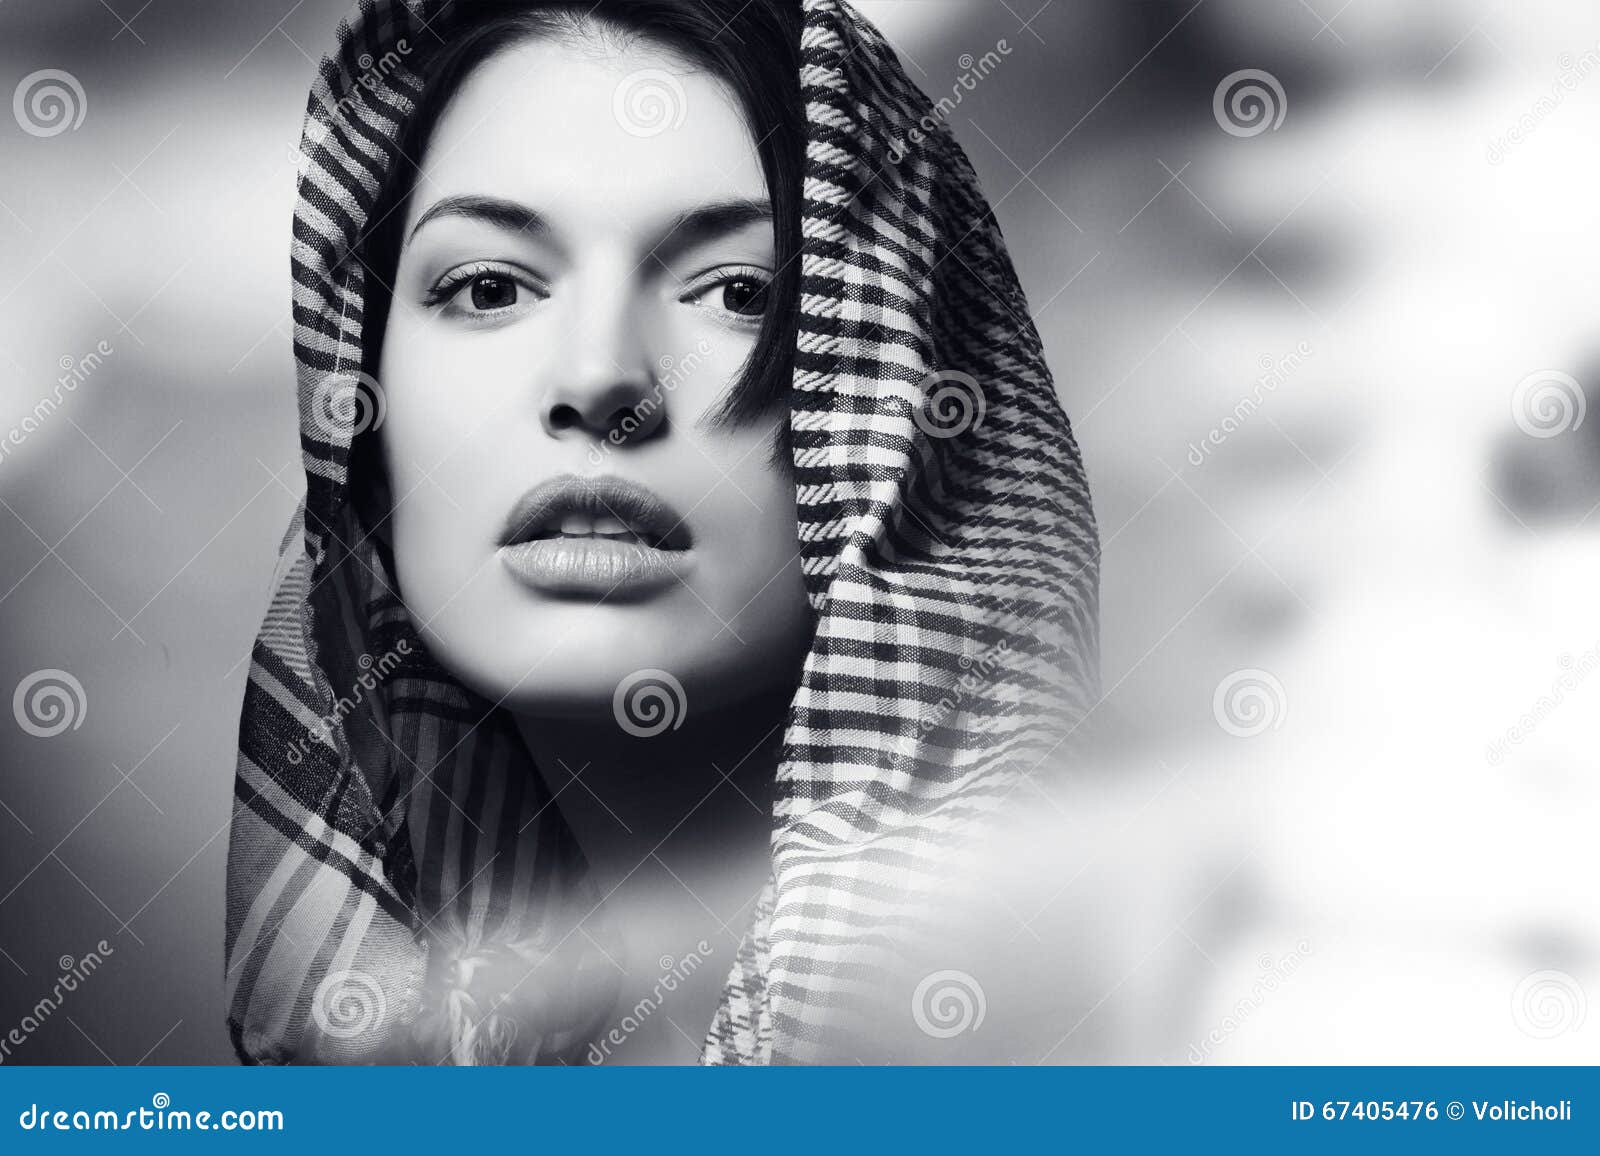 beautiful girl wearing a scarf, portrait, black and white